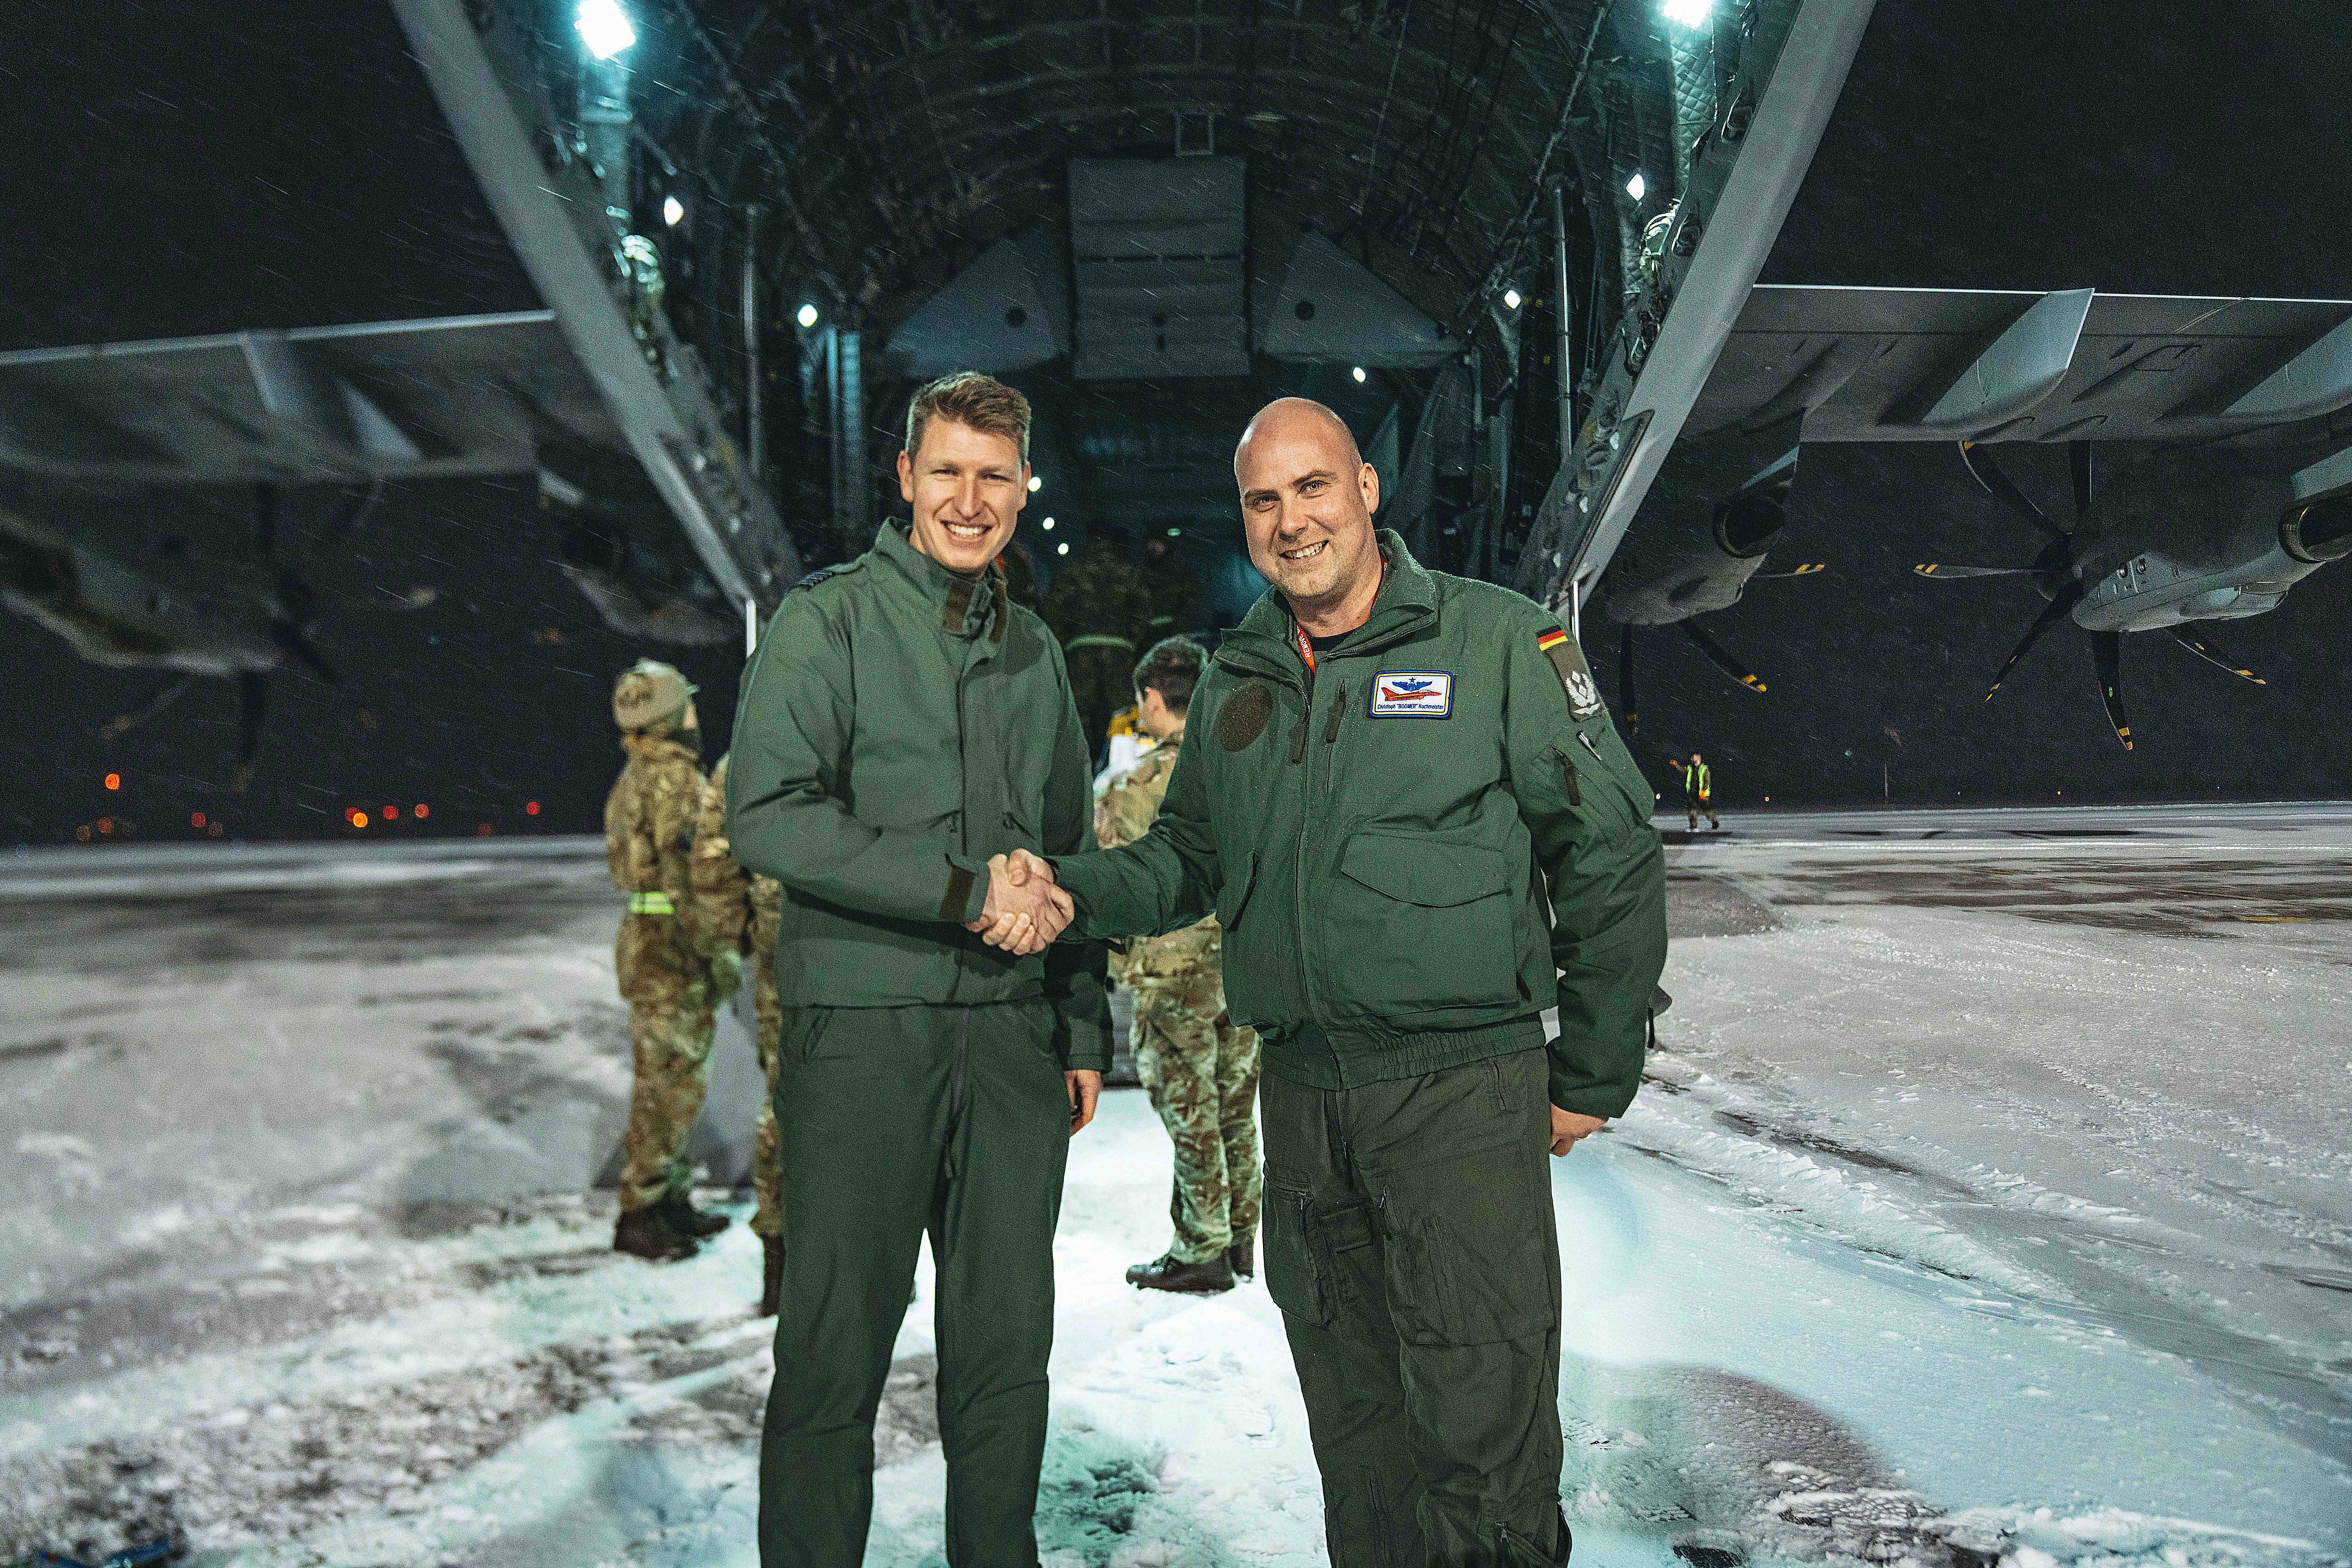 Image shows RAF aviator and German Air Force personnel shaking hands.